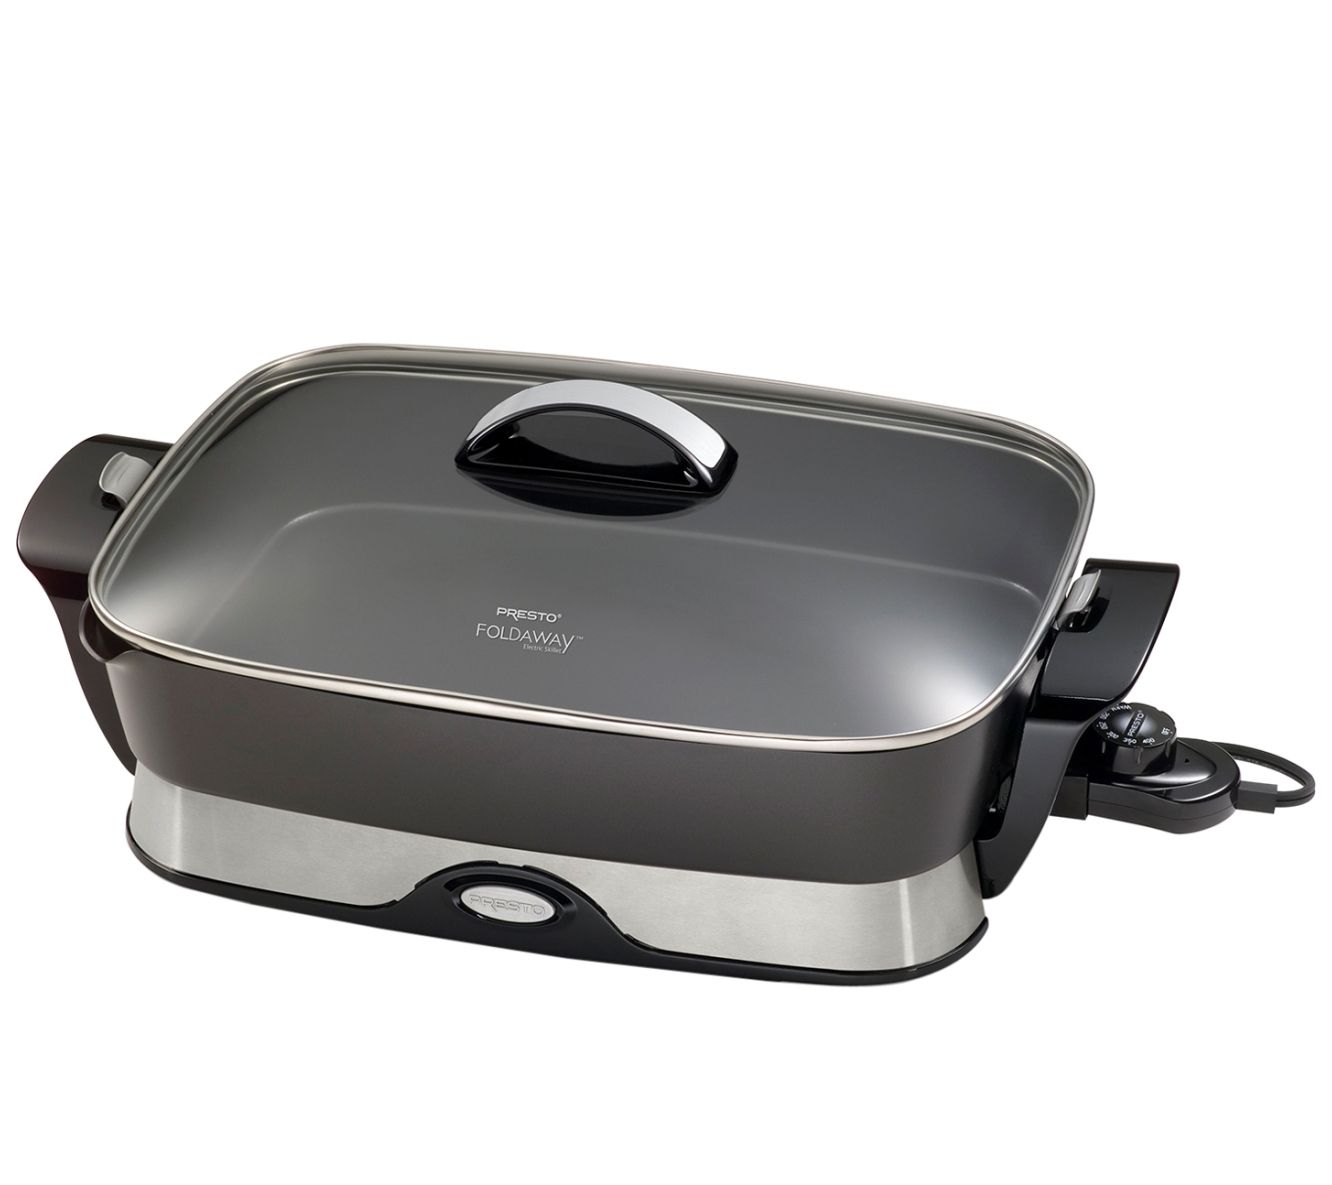 Presto 11 in. Electric Skillet With Glass Cover